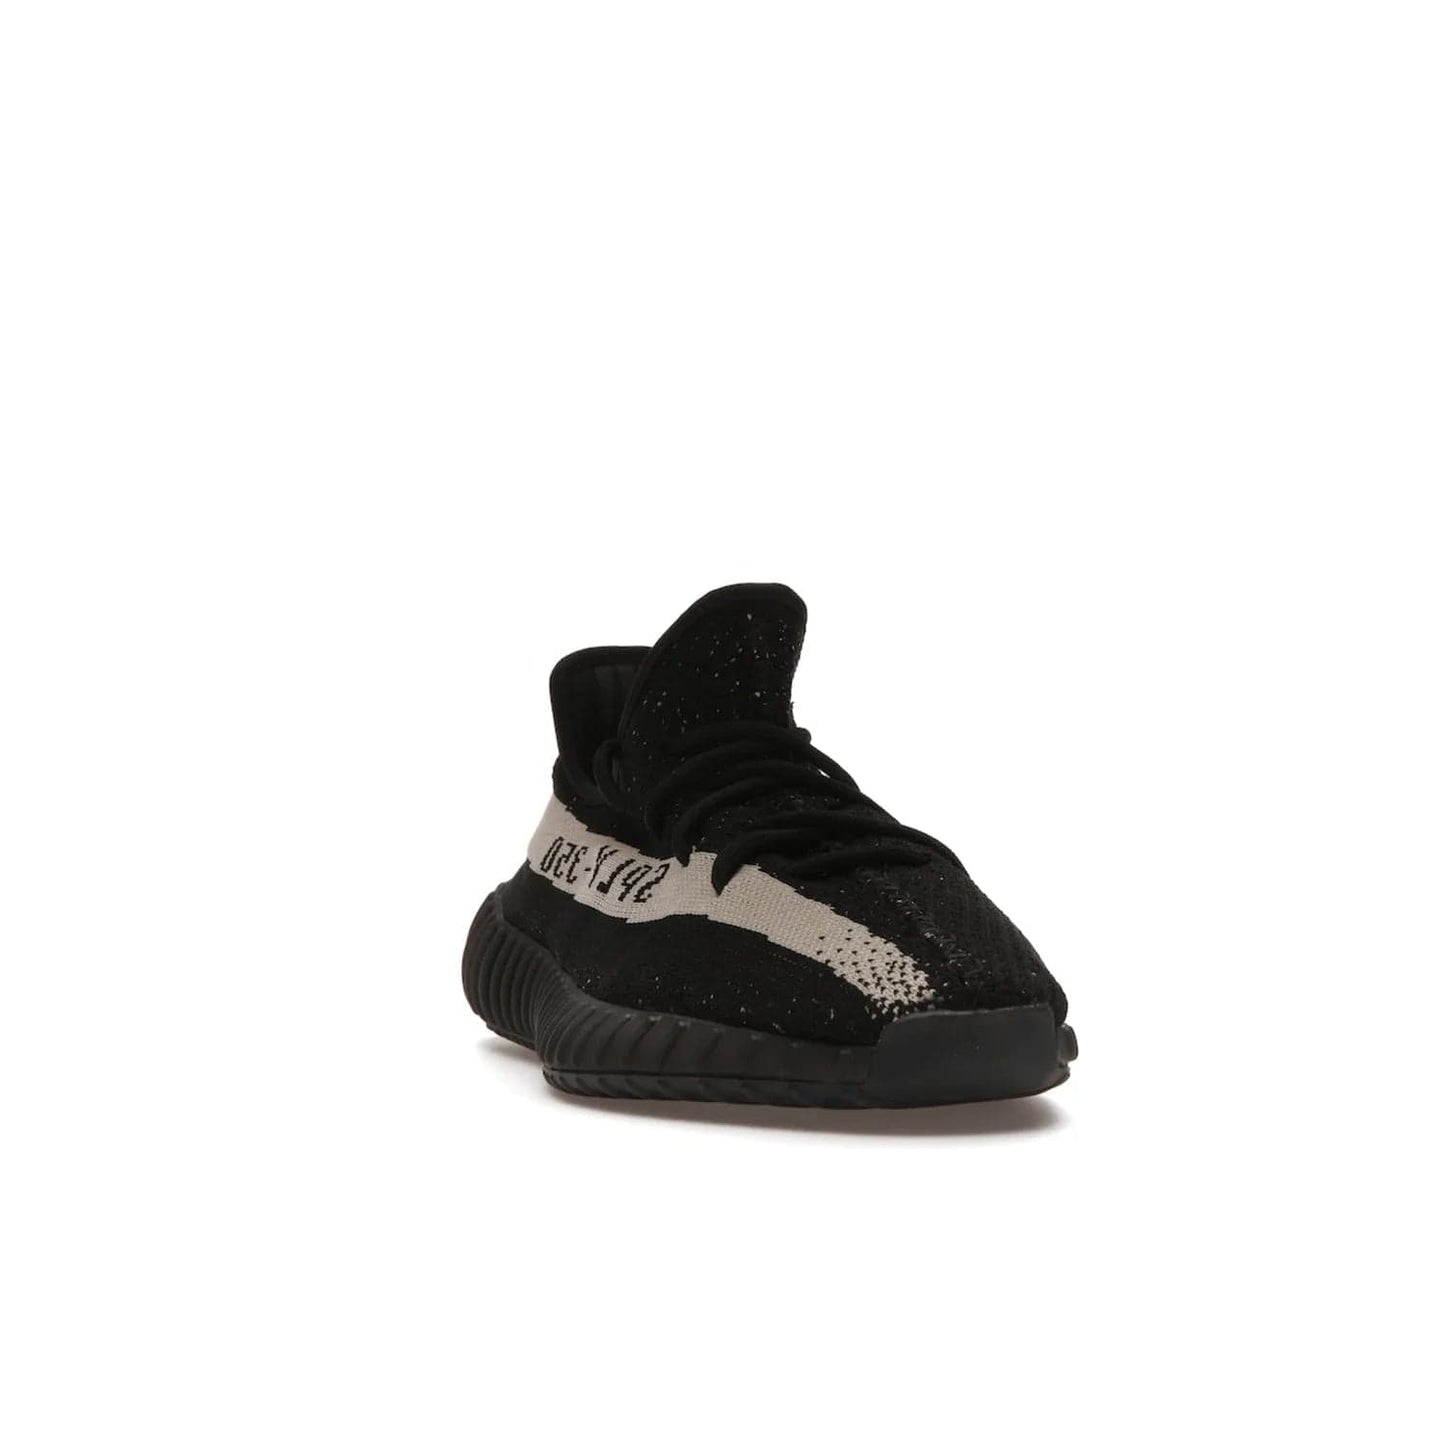 adidas Yeezy Boost 350 V2 Core Black White (2016/2022) - Image 8 - Only at www.BallersClubKickz.com - Stylish adidas Yeezy Boost 350 V2 in classic black with white "SPLY-350" stitched to the side stripe. Features Primeknit upper & Boost sole for comfort. Restock in March 2022.